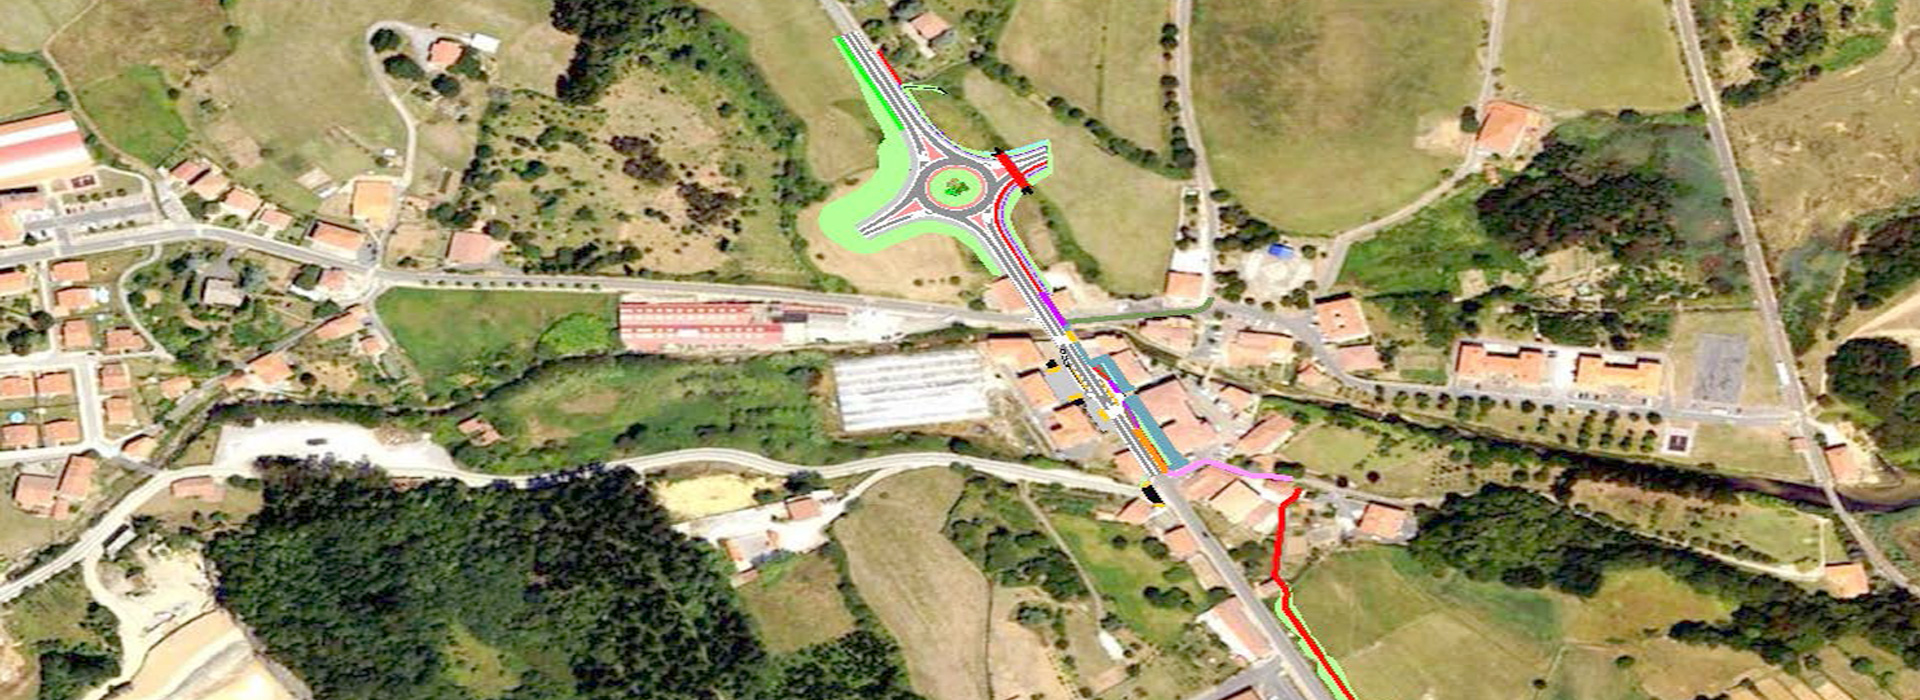 IMPROVEMENT AND UPGRADING PROJECTS OF THE BISCAY ROAD NETWORK - 4